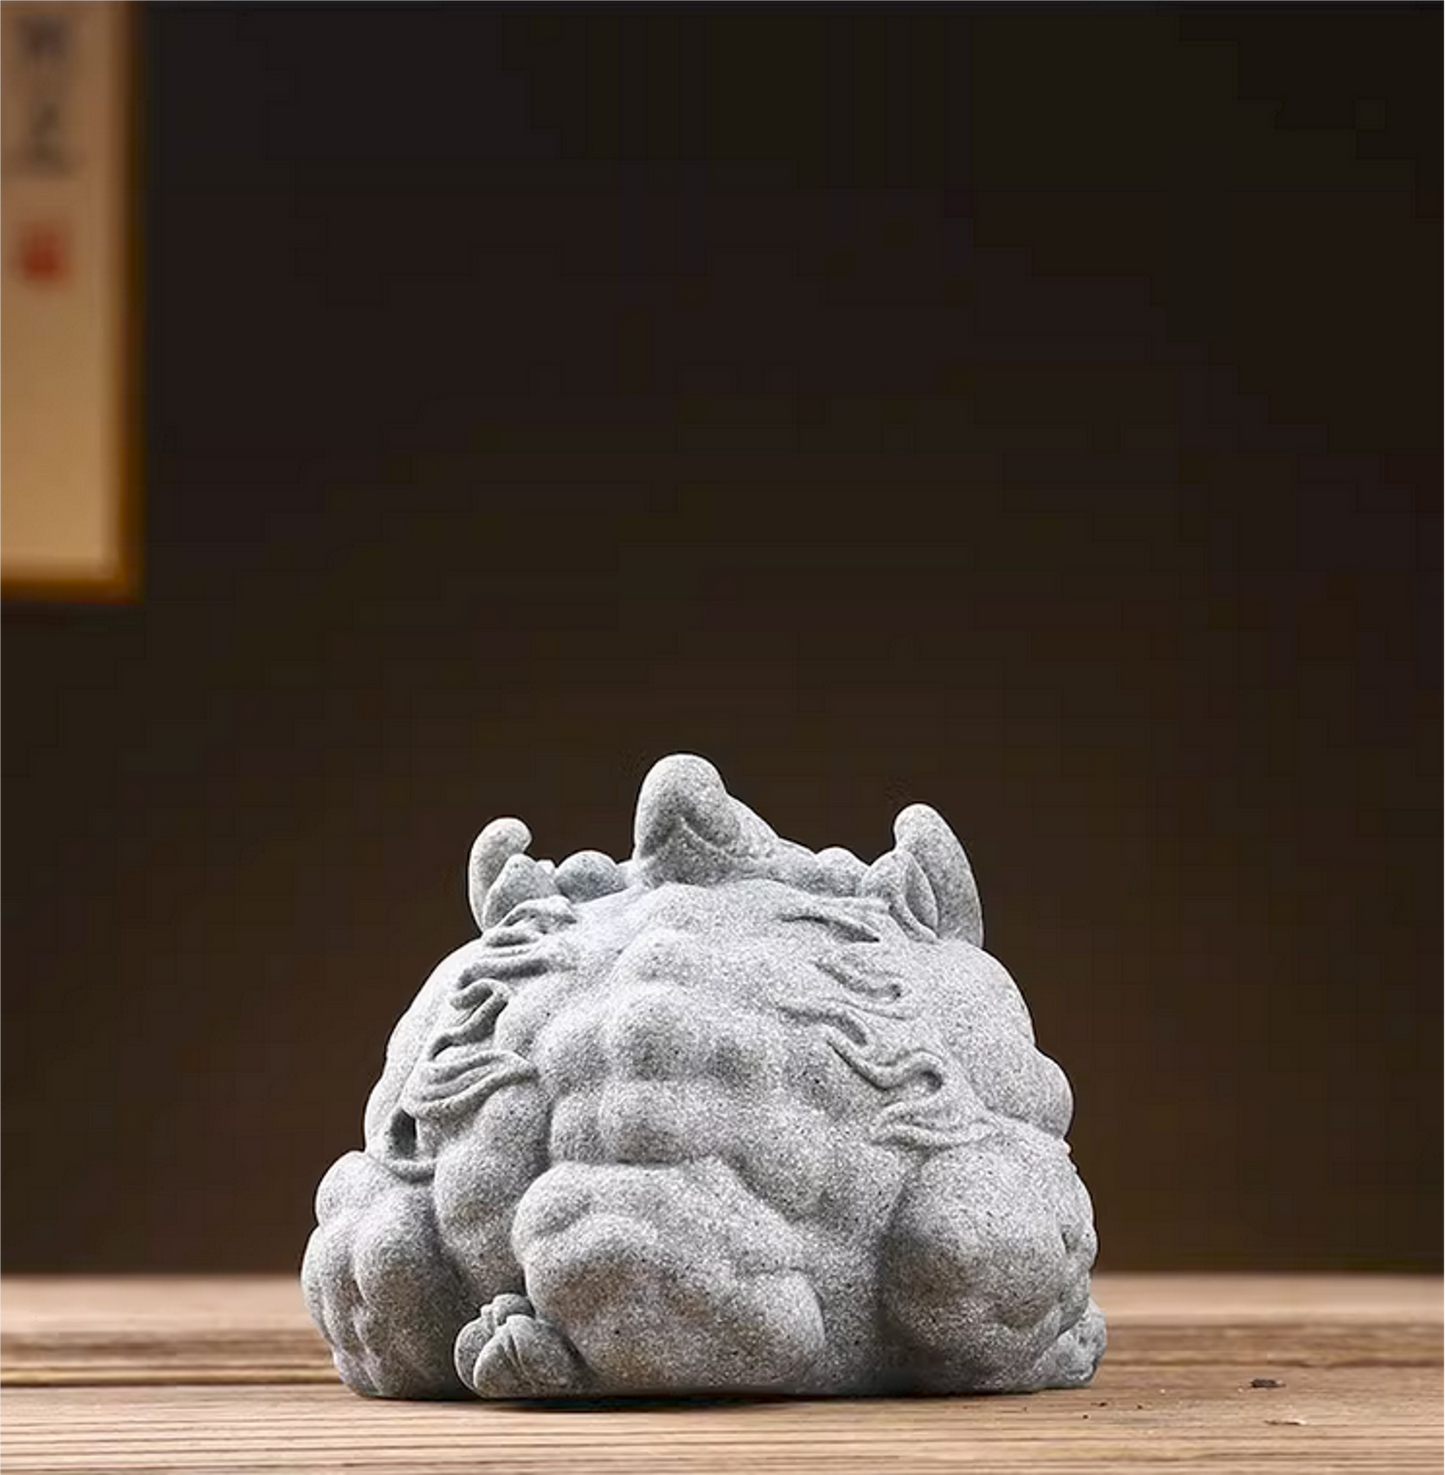 Green Sandstone Jin Chan Toad Sculpture & Statue | Fengshui | Good Fortune and Prosperity | Home and Office Display | Frog